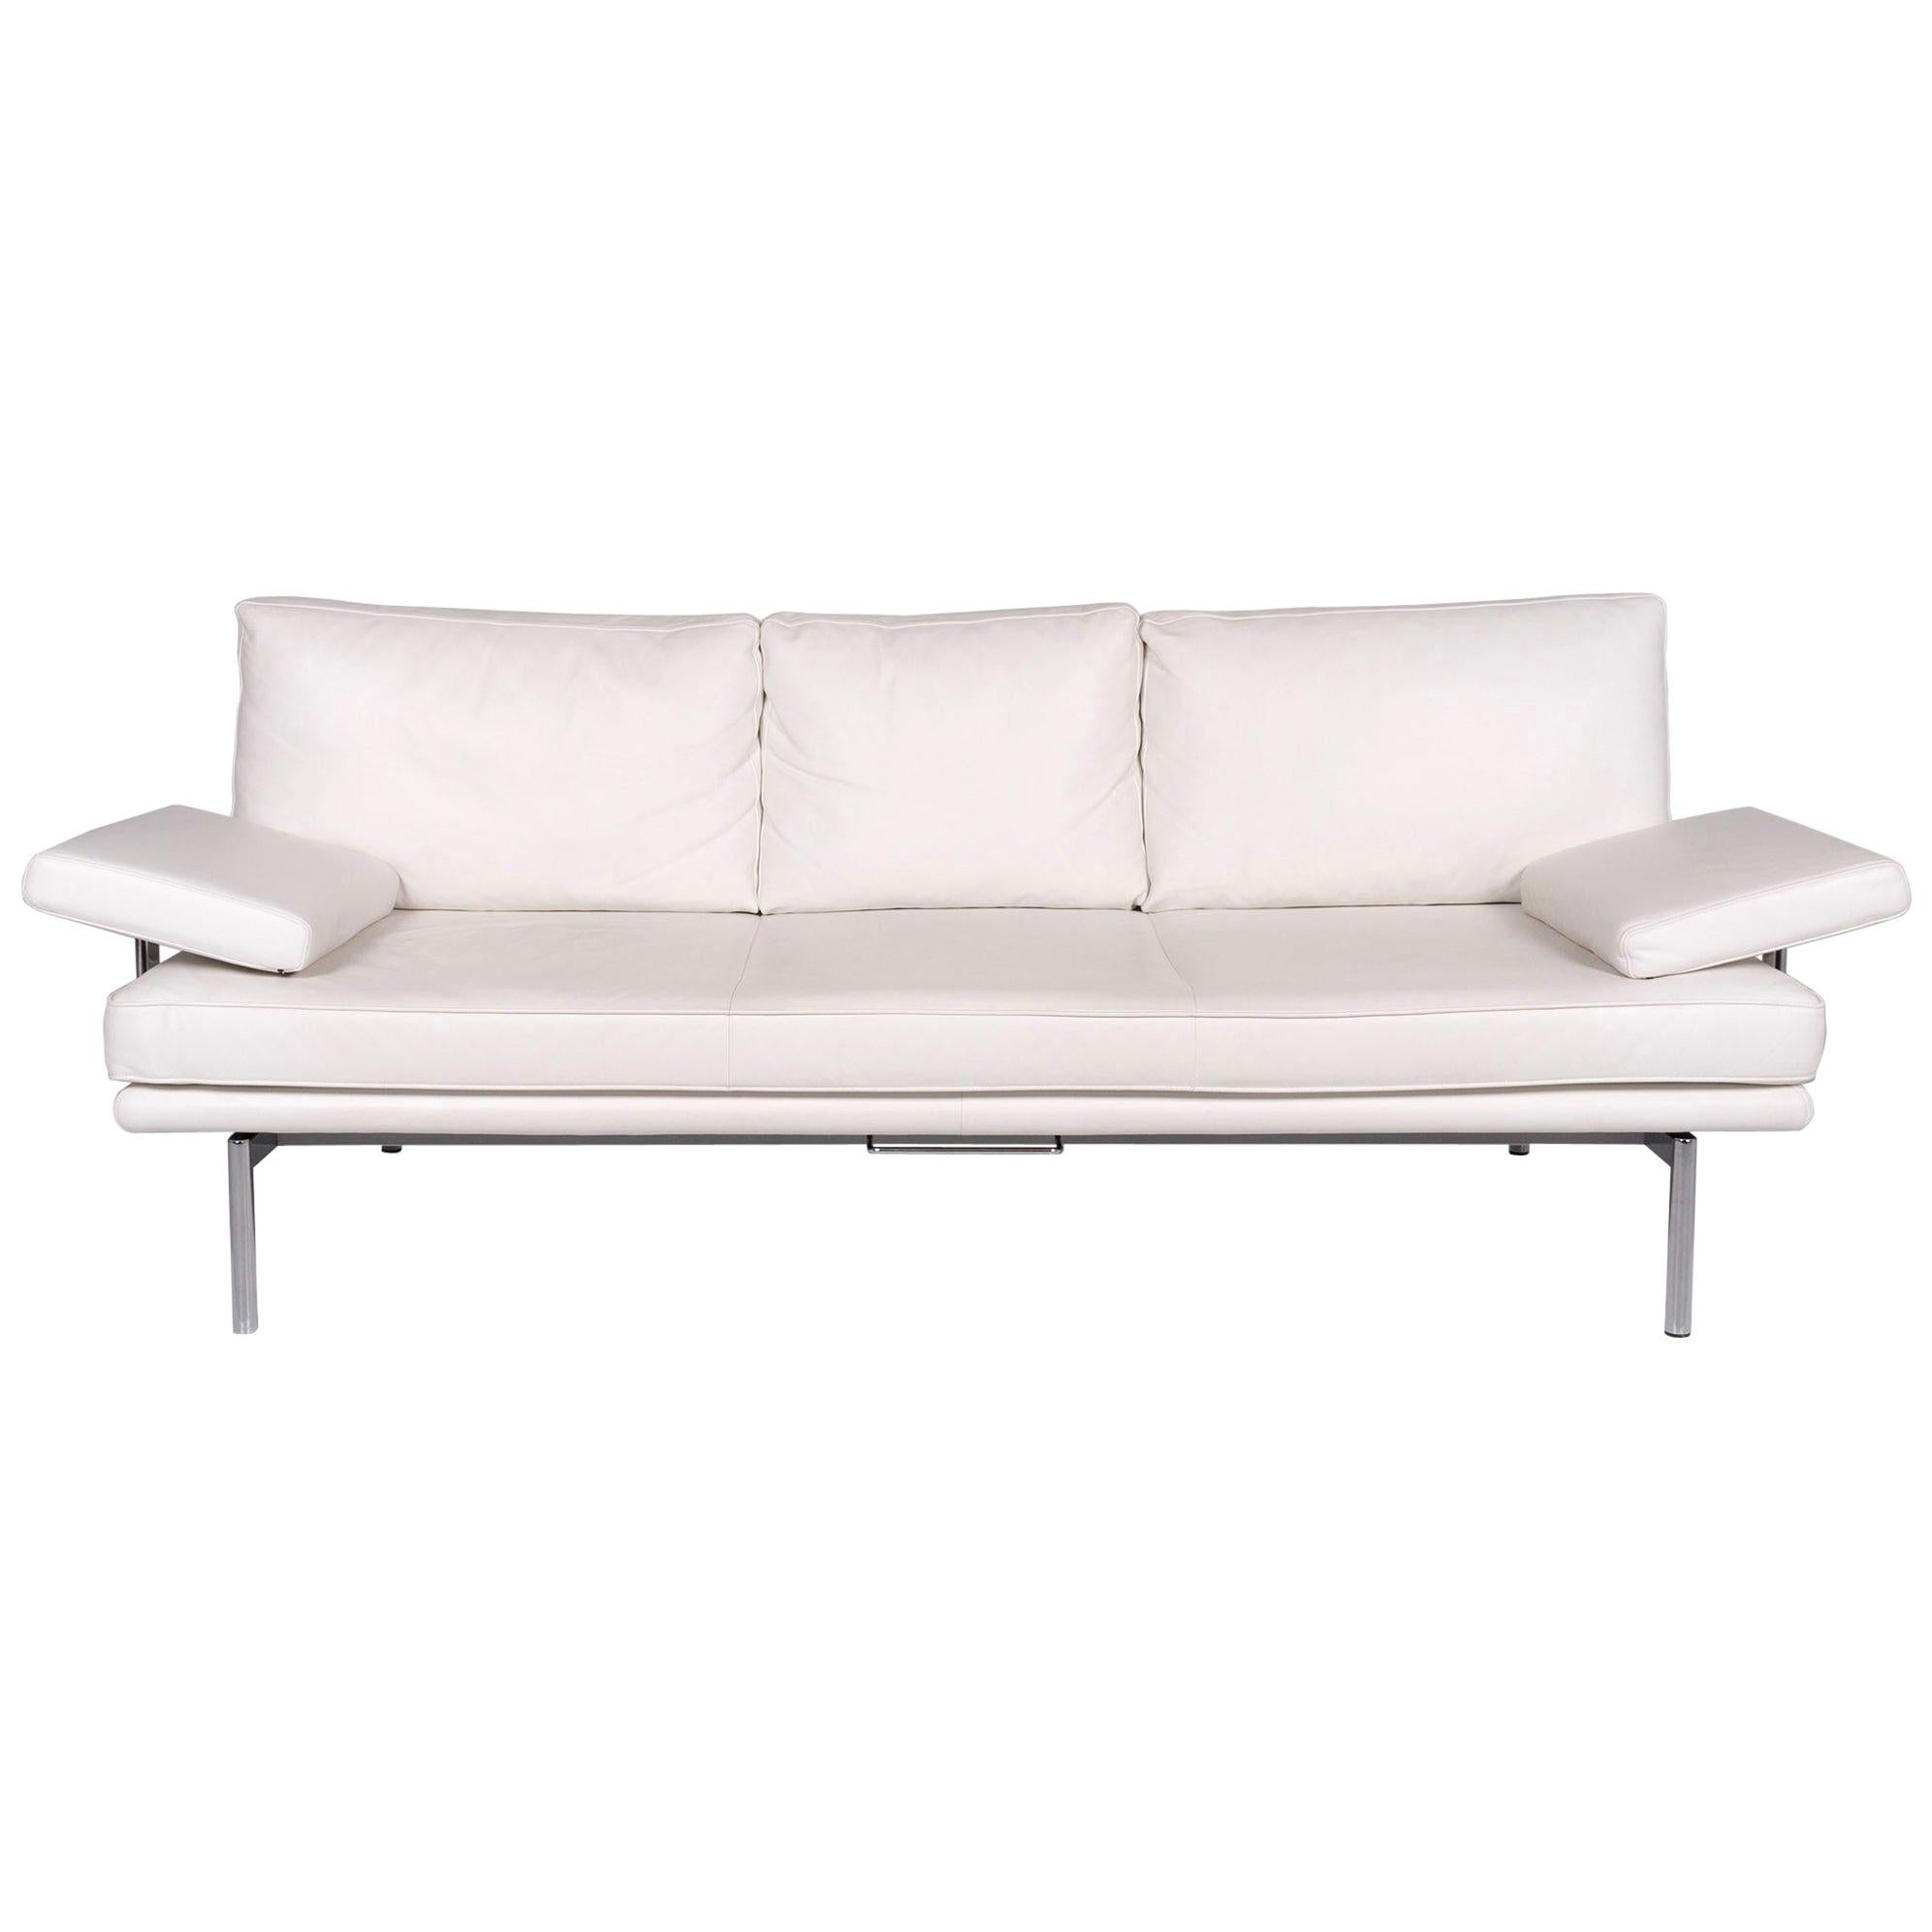 Walter Knoll Living Platform Leather Sofa White Three-Seat Function Couch For Sale